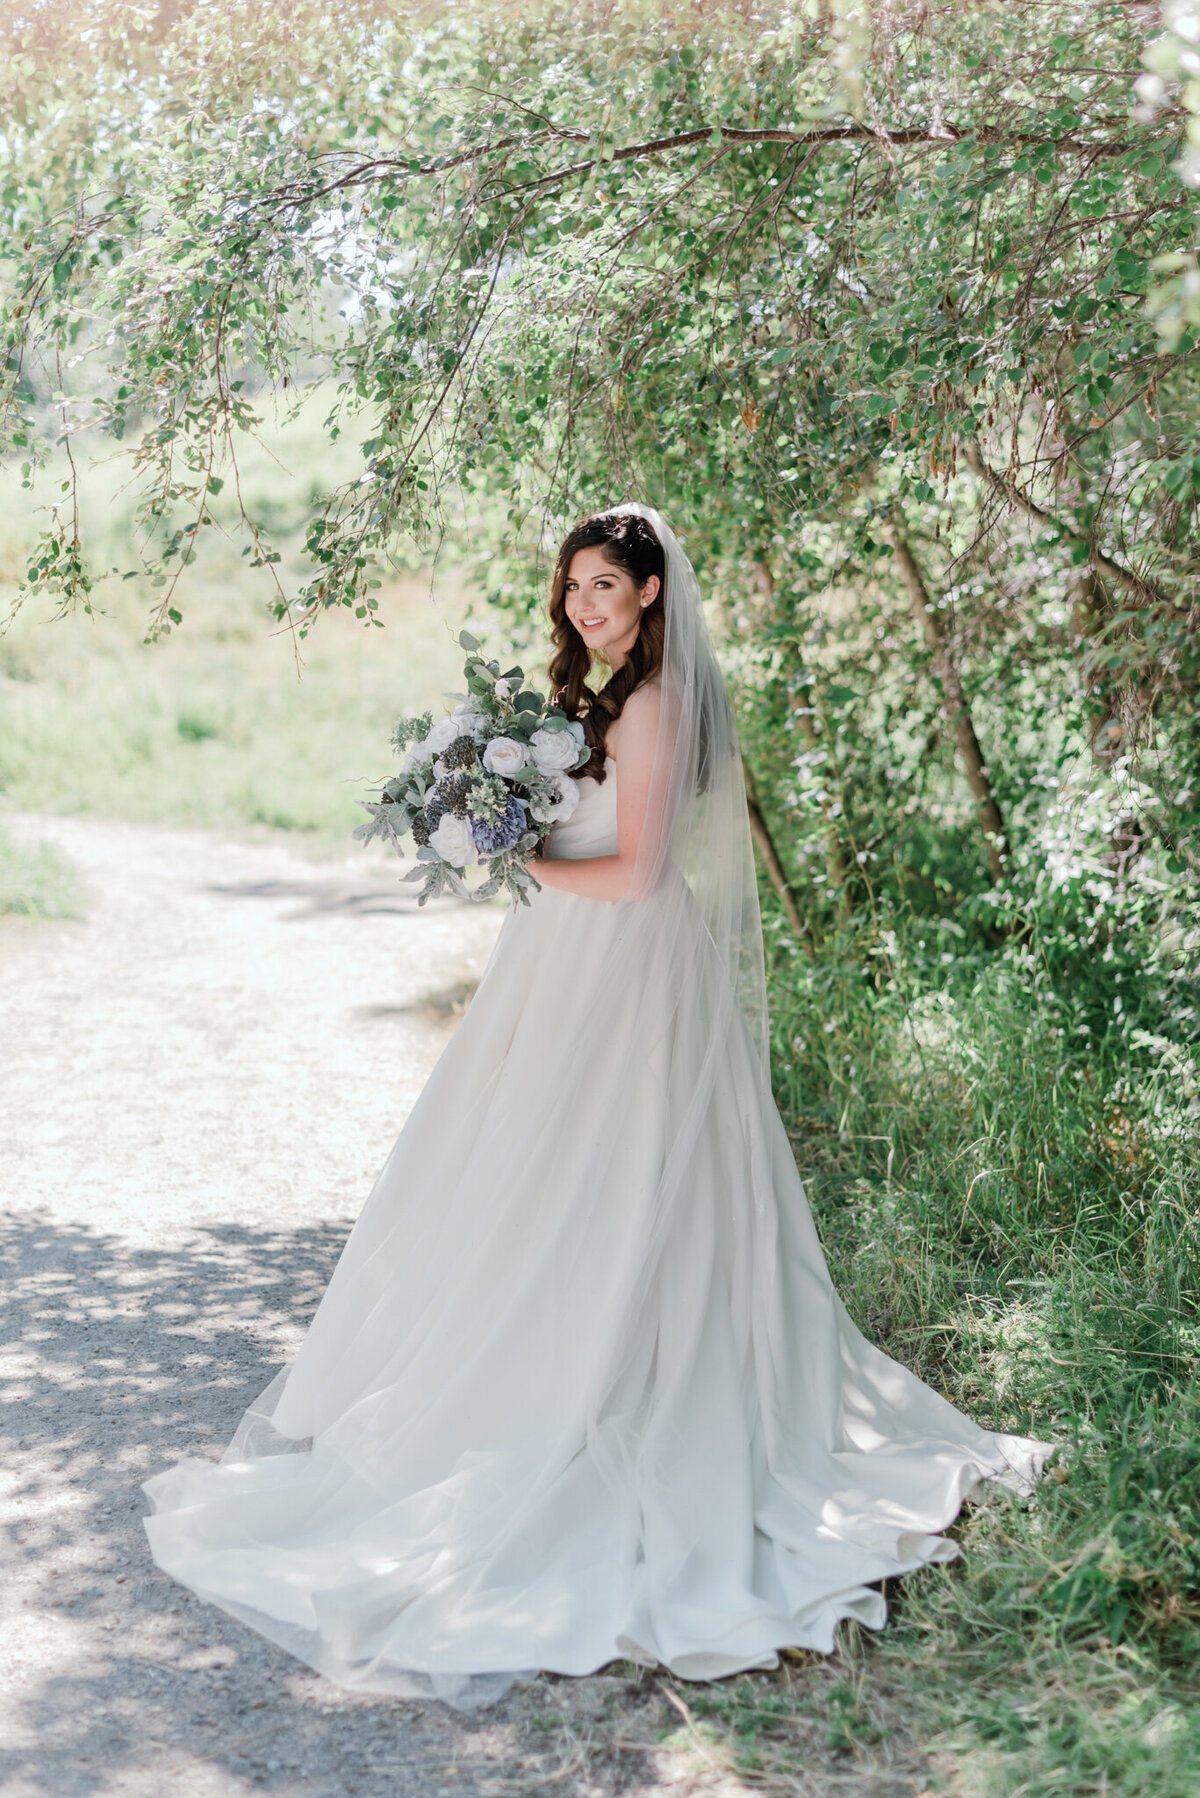 Gorgeous and elegant bride in beautiful satin gown, veil, and bouquet with blue, purple and white flowers, captured by Kaity Body Photography, elegant film inspired wedding photographer in Calgary, Alberta. Featured on the Bronte Bride Vendor Guide.